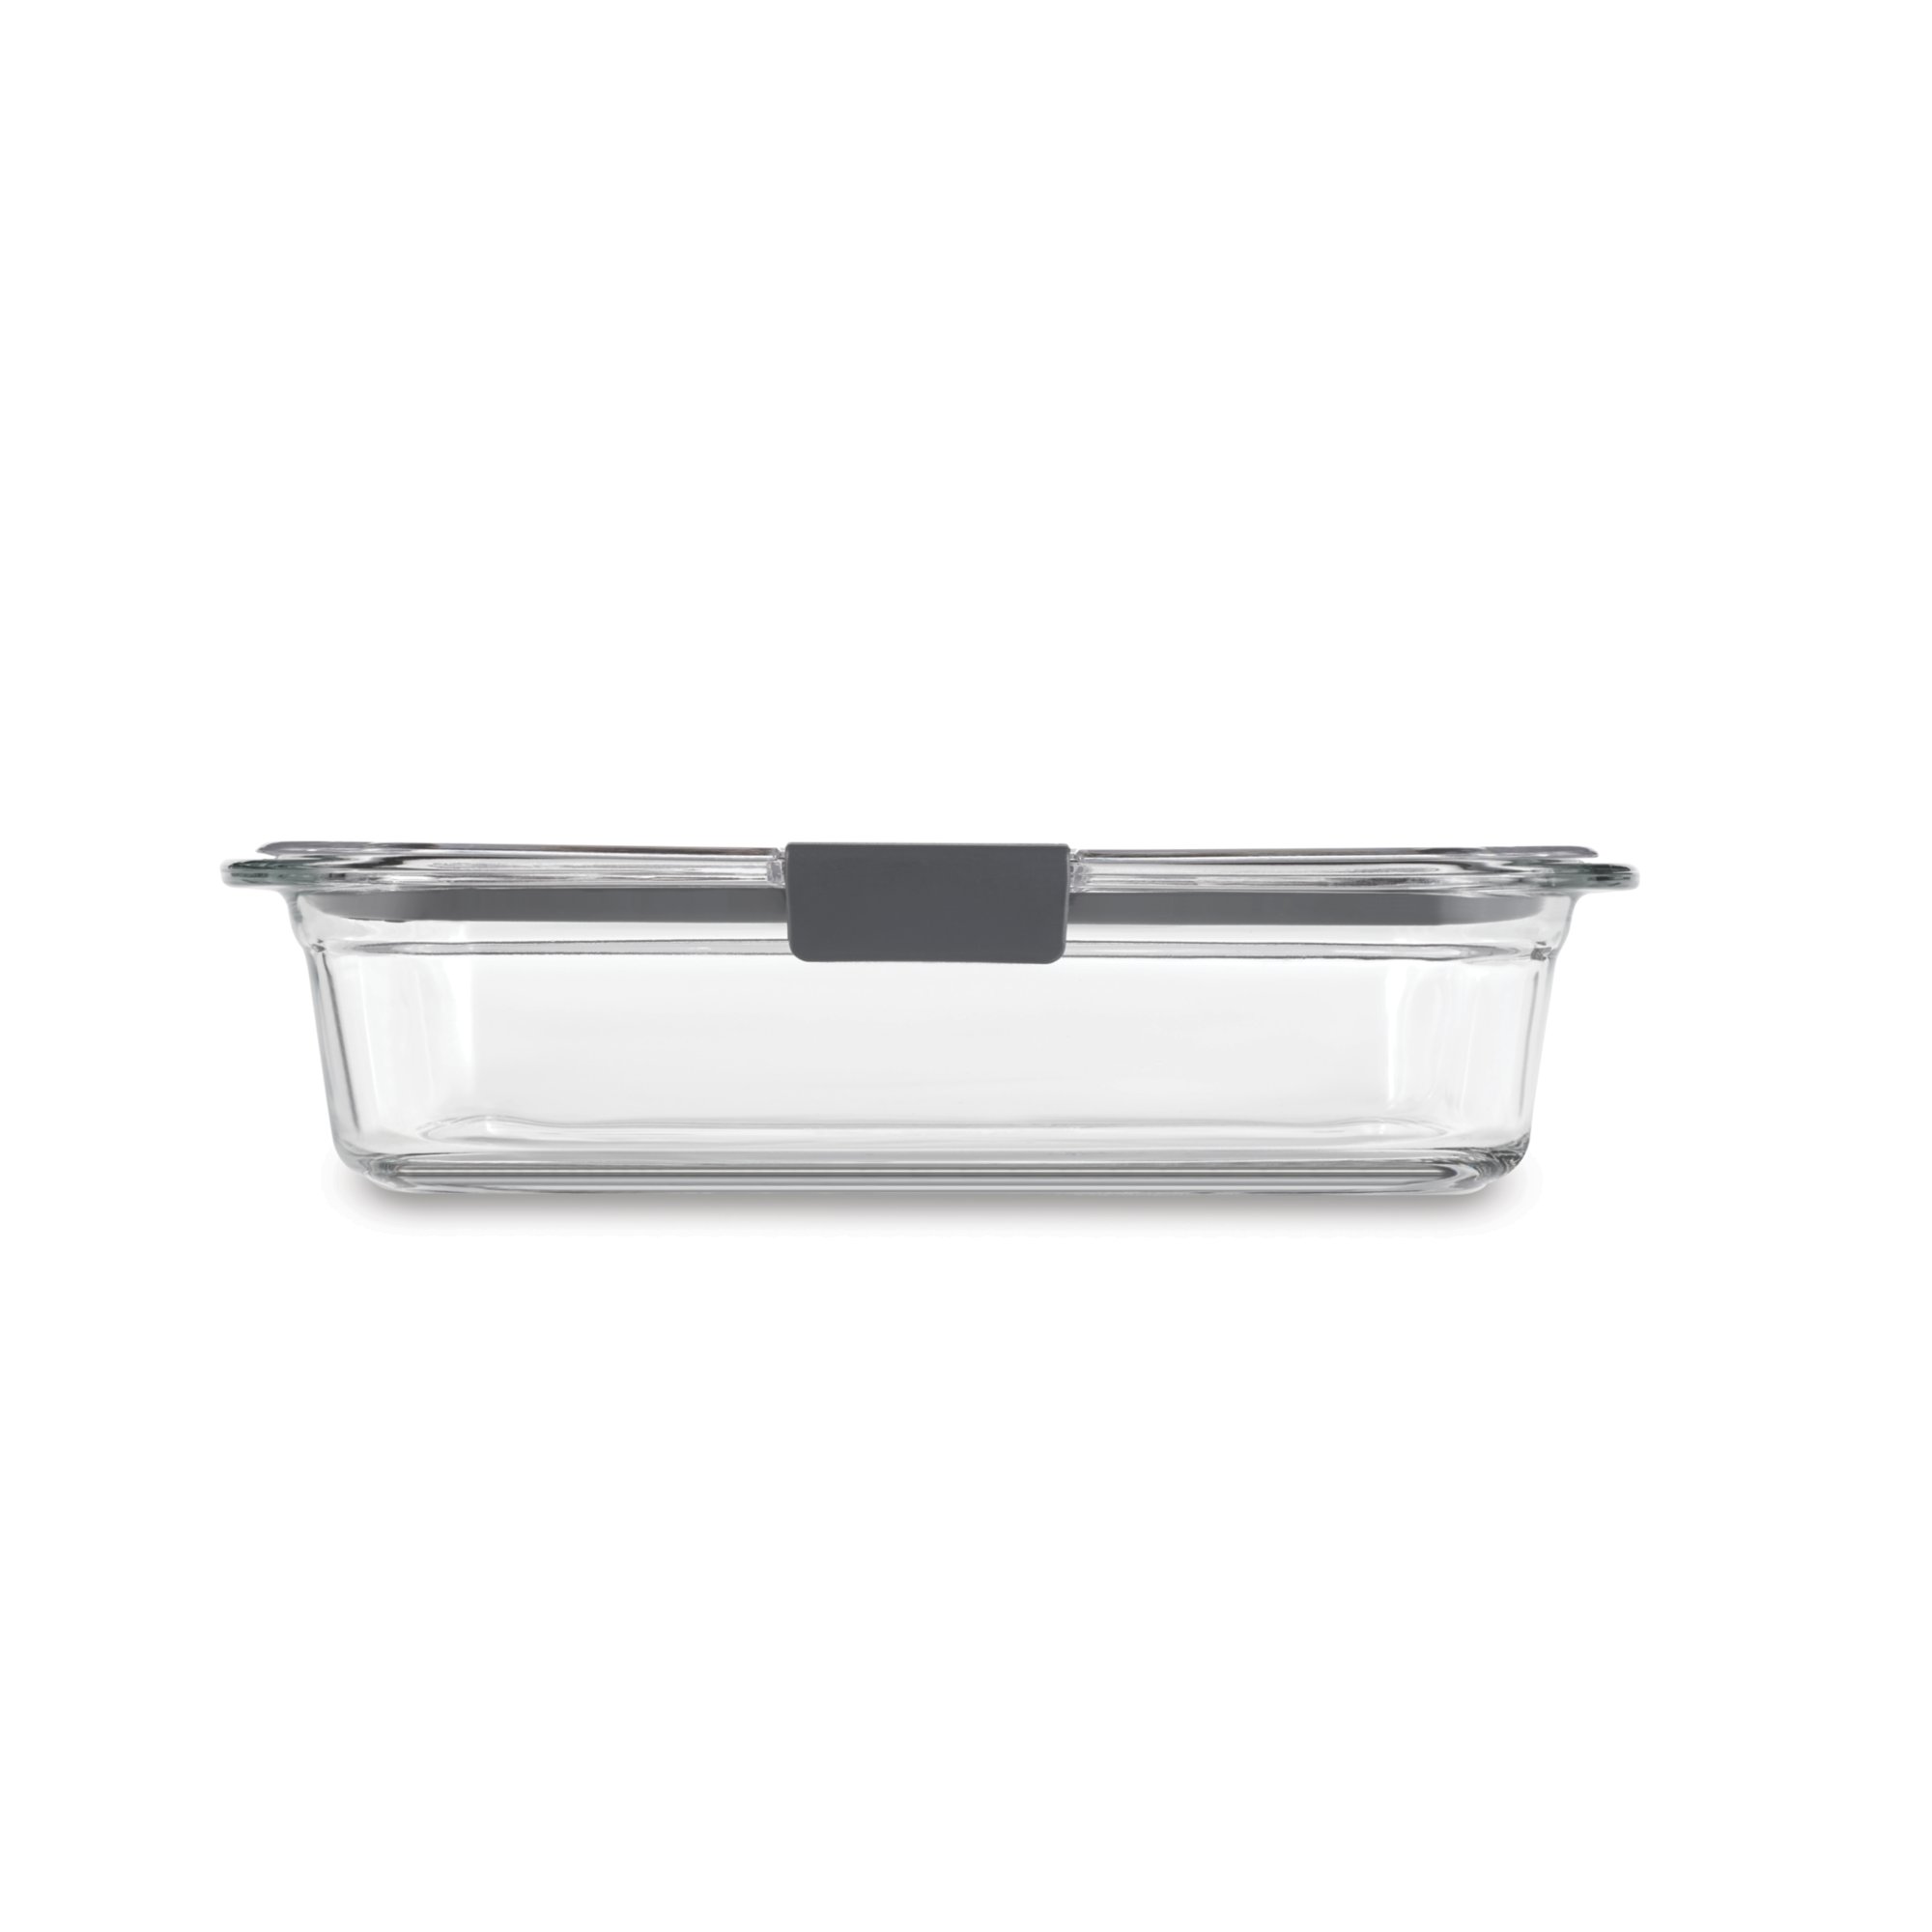 https://s7d9.scene7.com/is/image/NewellRubbermaid/2118314-rubbermaid-food-storage-brilliance-glass-clear-8c-straight-on?wid=2000&hei=2000